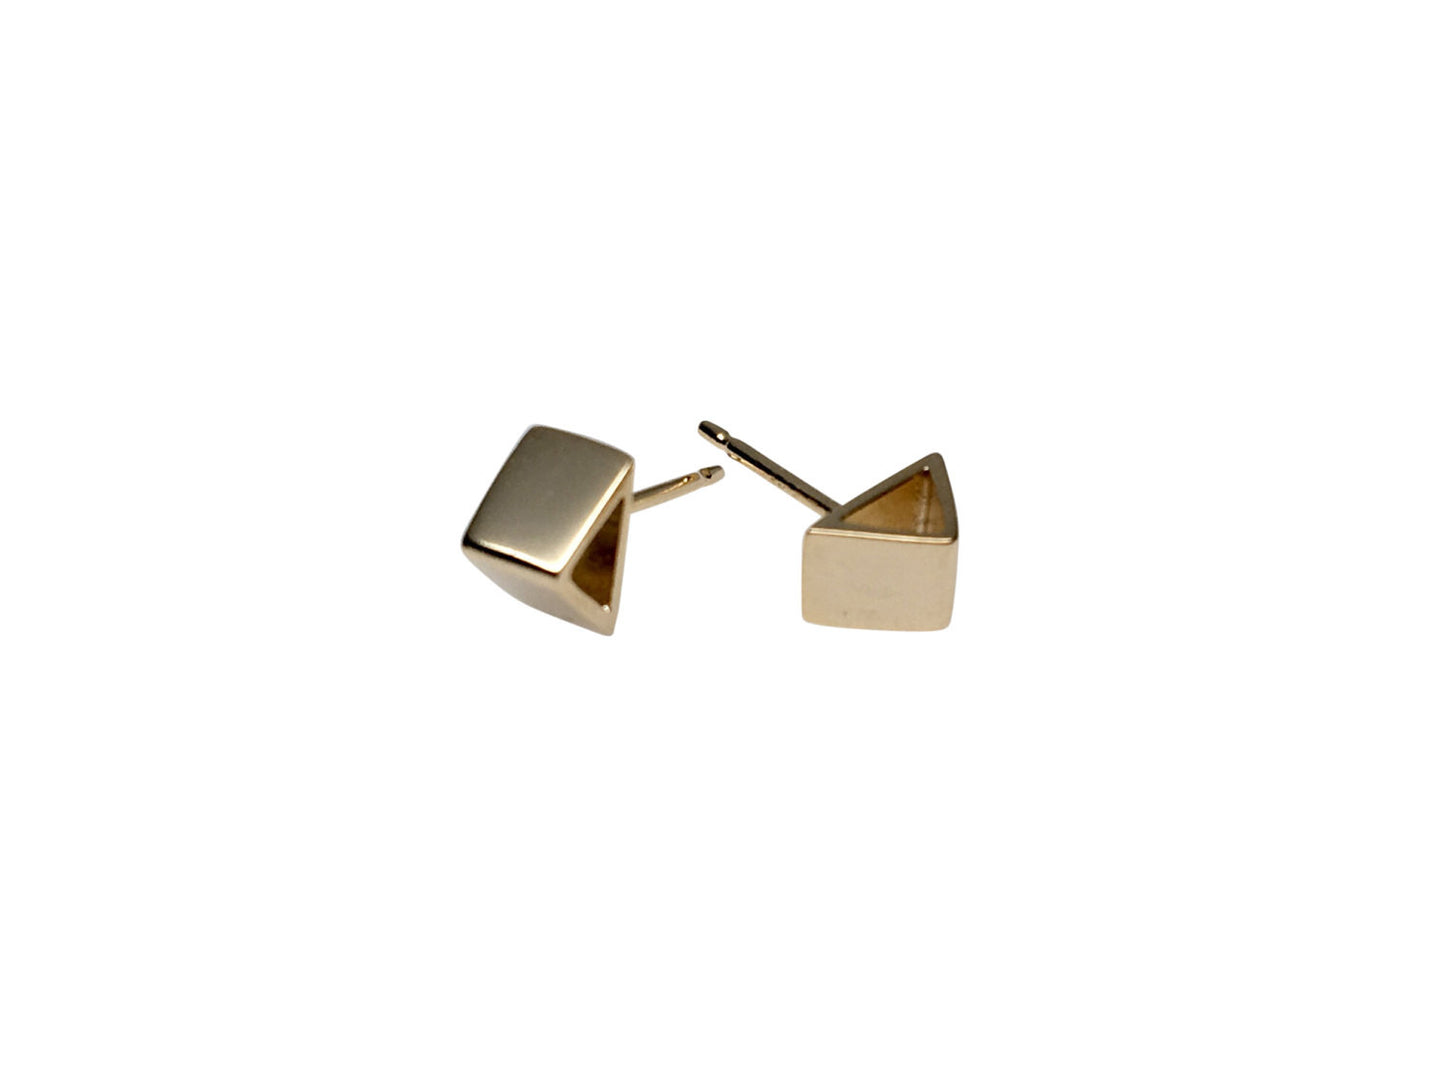 A a pair of gold triangle Stud earrings on a white background